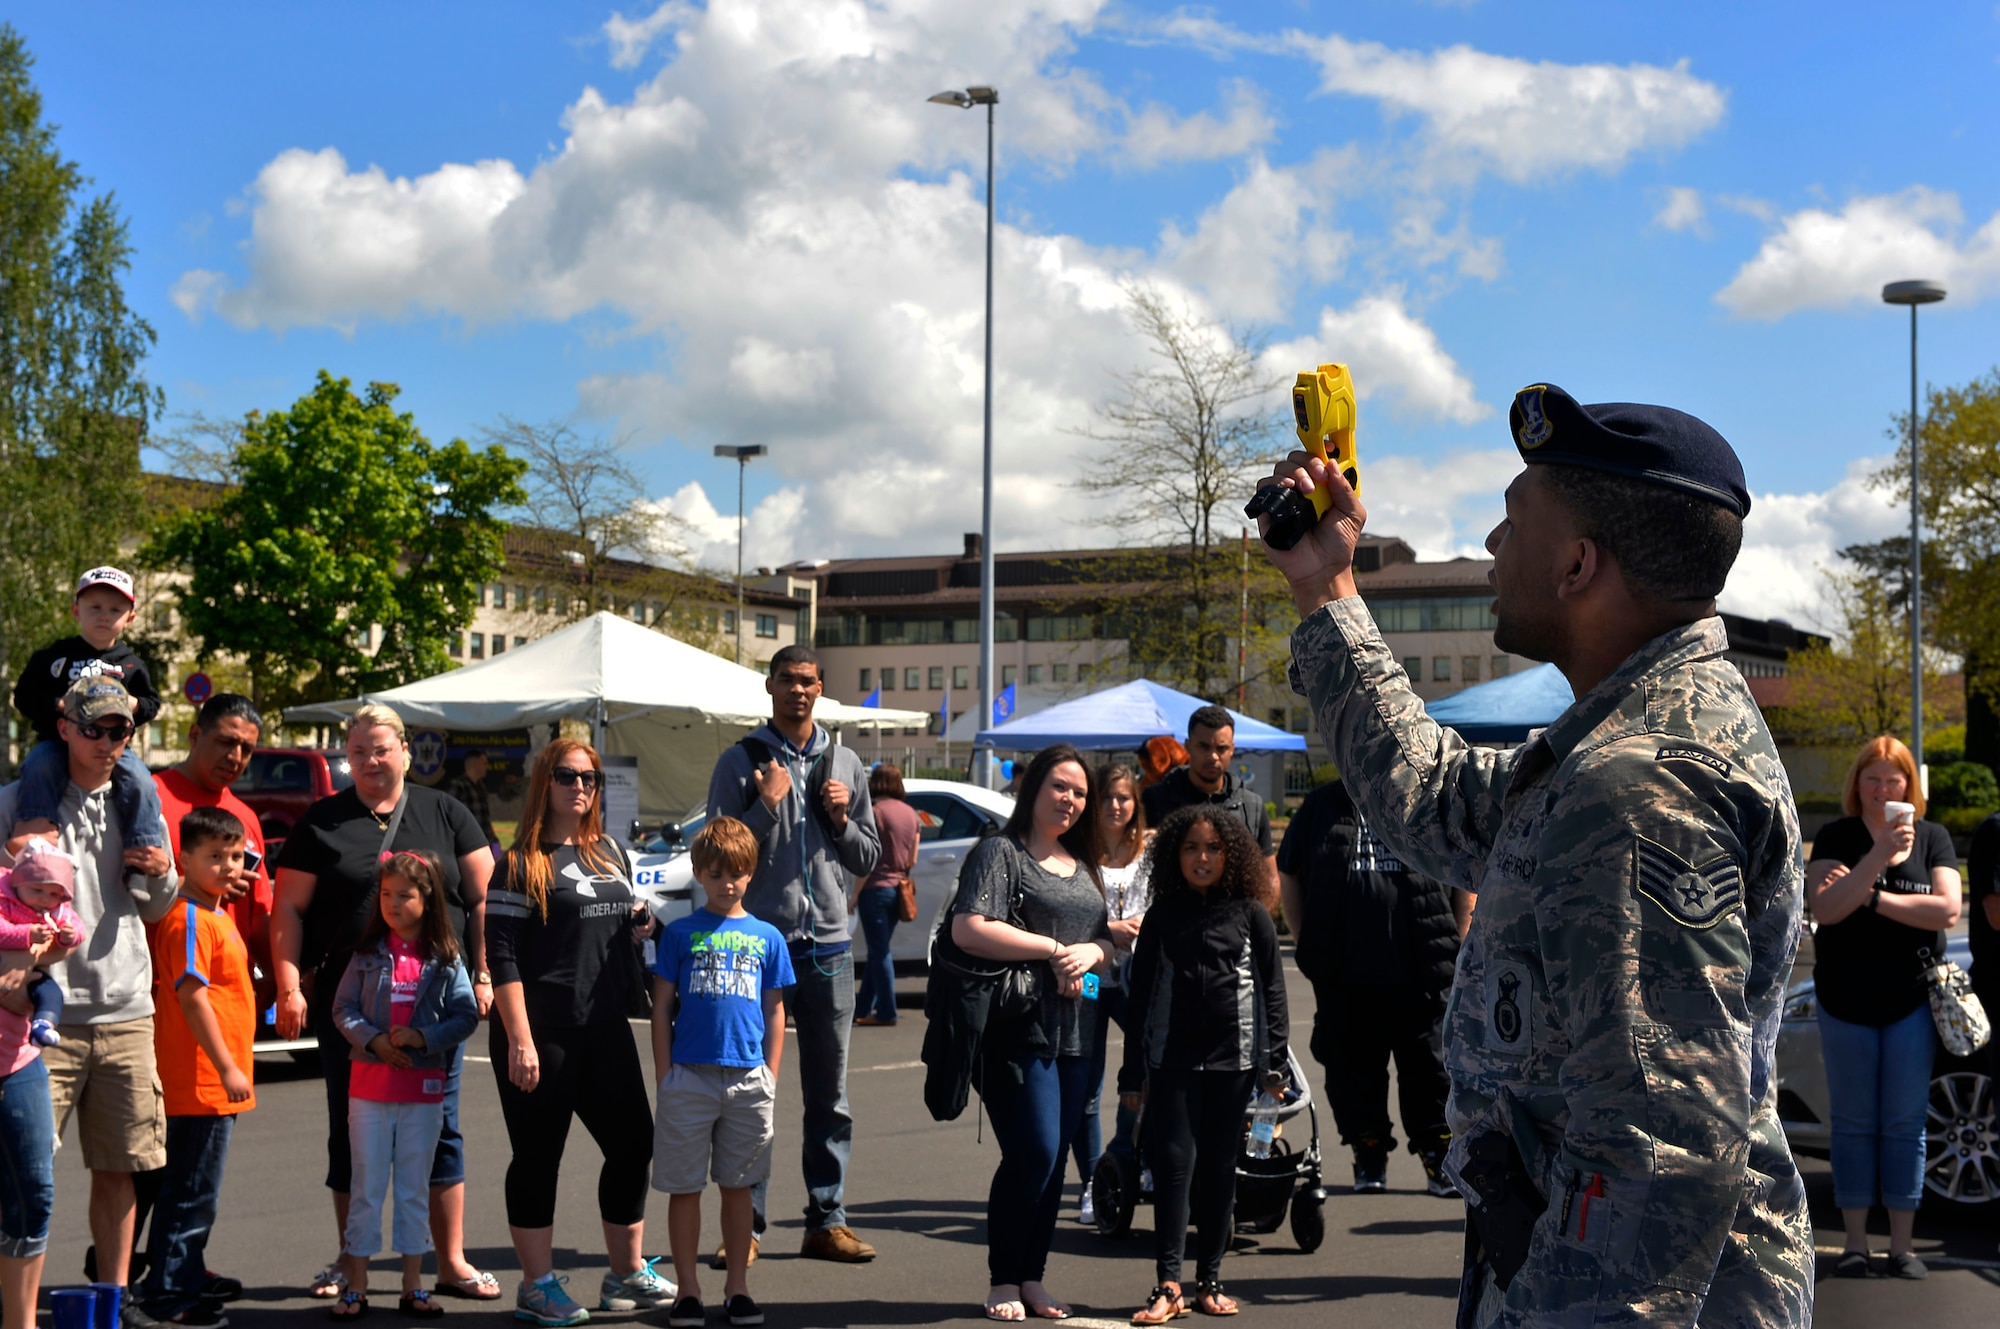 Staff Sgt. Stephen Peterson, 86th Security Forces Squadron base defense operations center controller, demonstrates the functions of a taser during a community building event on Ramstein Air Base, Germany, May 13, 2017. The Police Week display involved participation from police members from the Air Force, Army, NATO, and German Polizei. (U.S. Air Force photo by Airman 1st Class Joshua Magbanua)